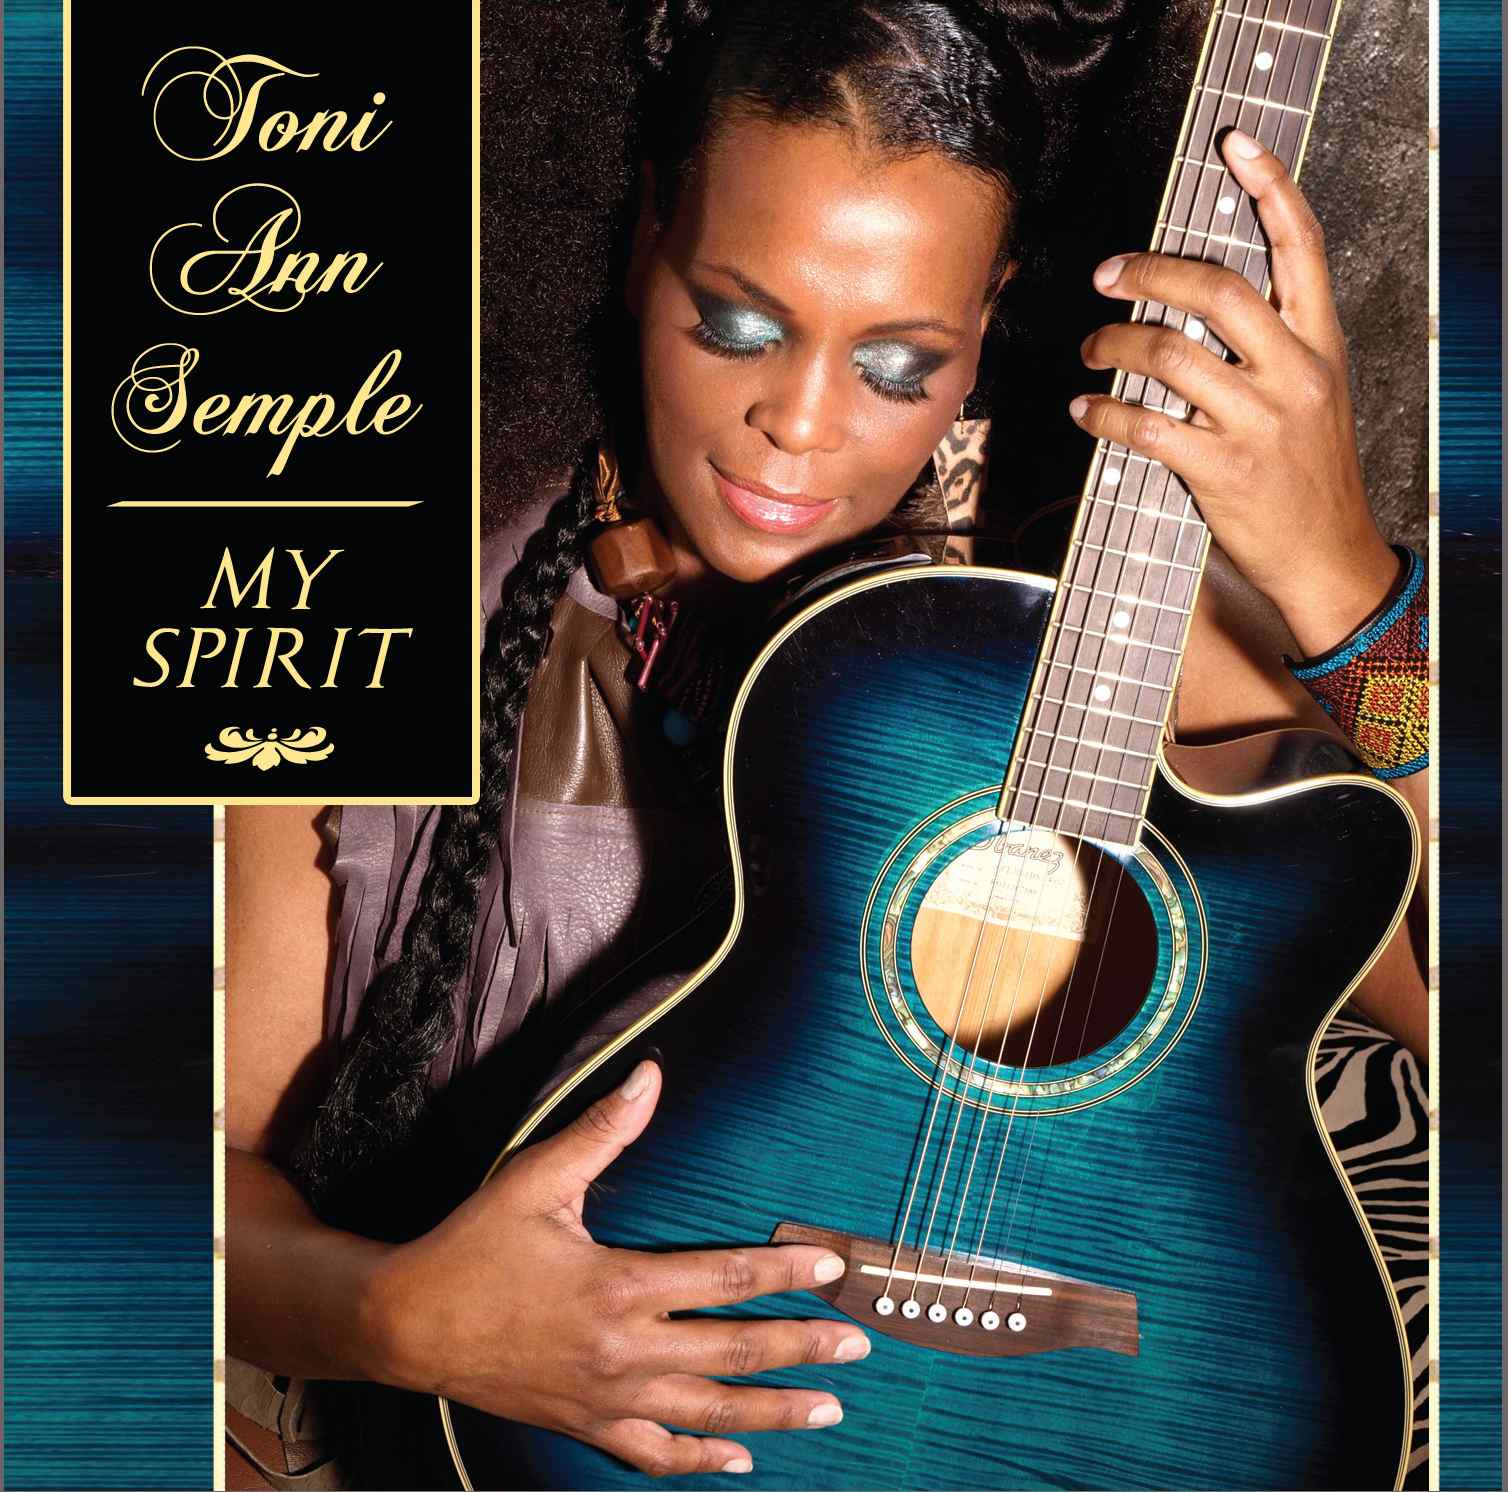 Talented Toni Ann Semple, Singer, Songwriter, Shares Her Smooth Jazz - R&amp; B Music Career